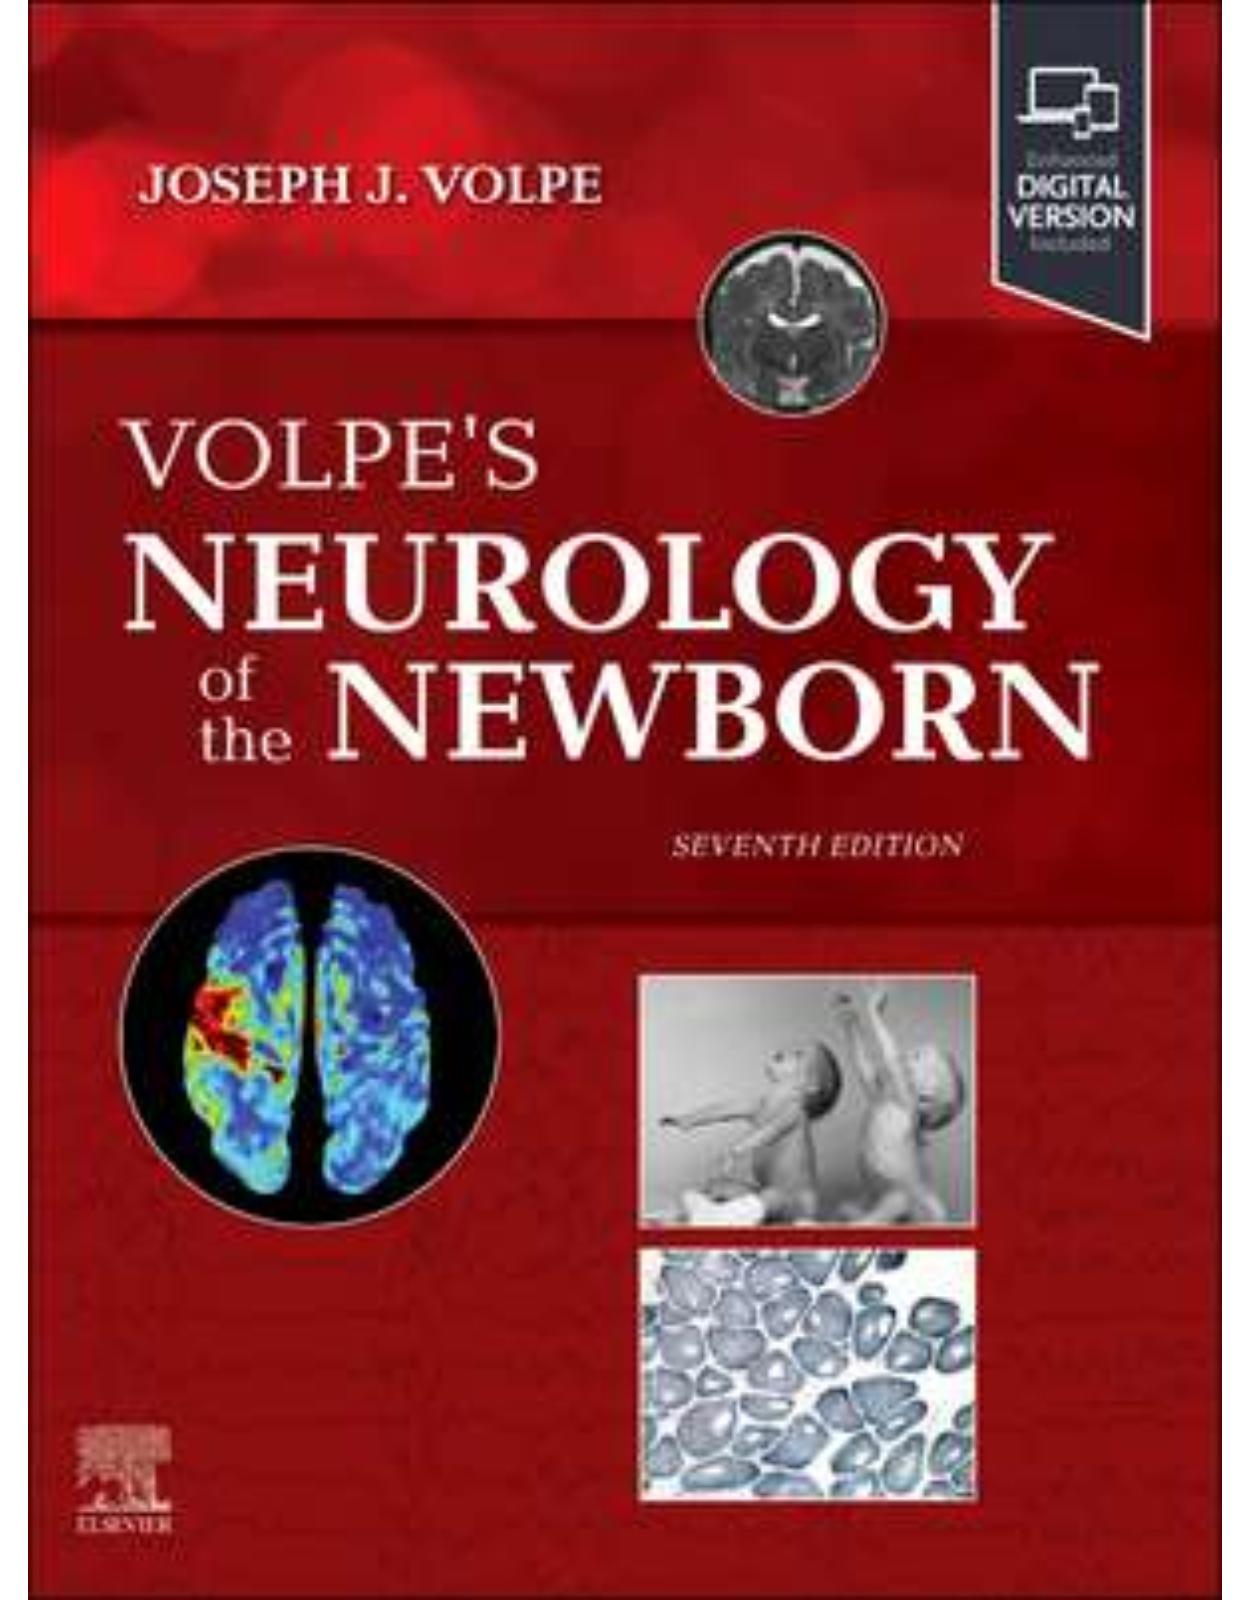 Volpe’s Neurology of the Newborn, 7th Edition